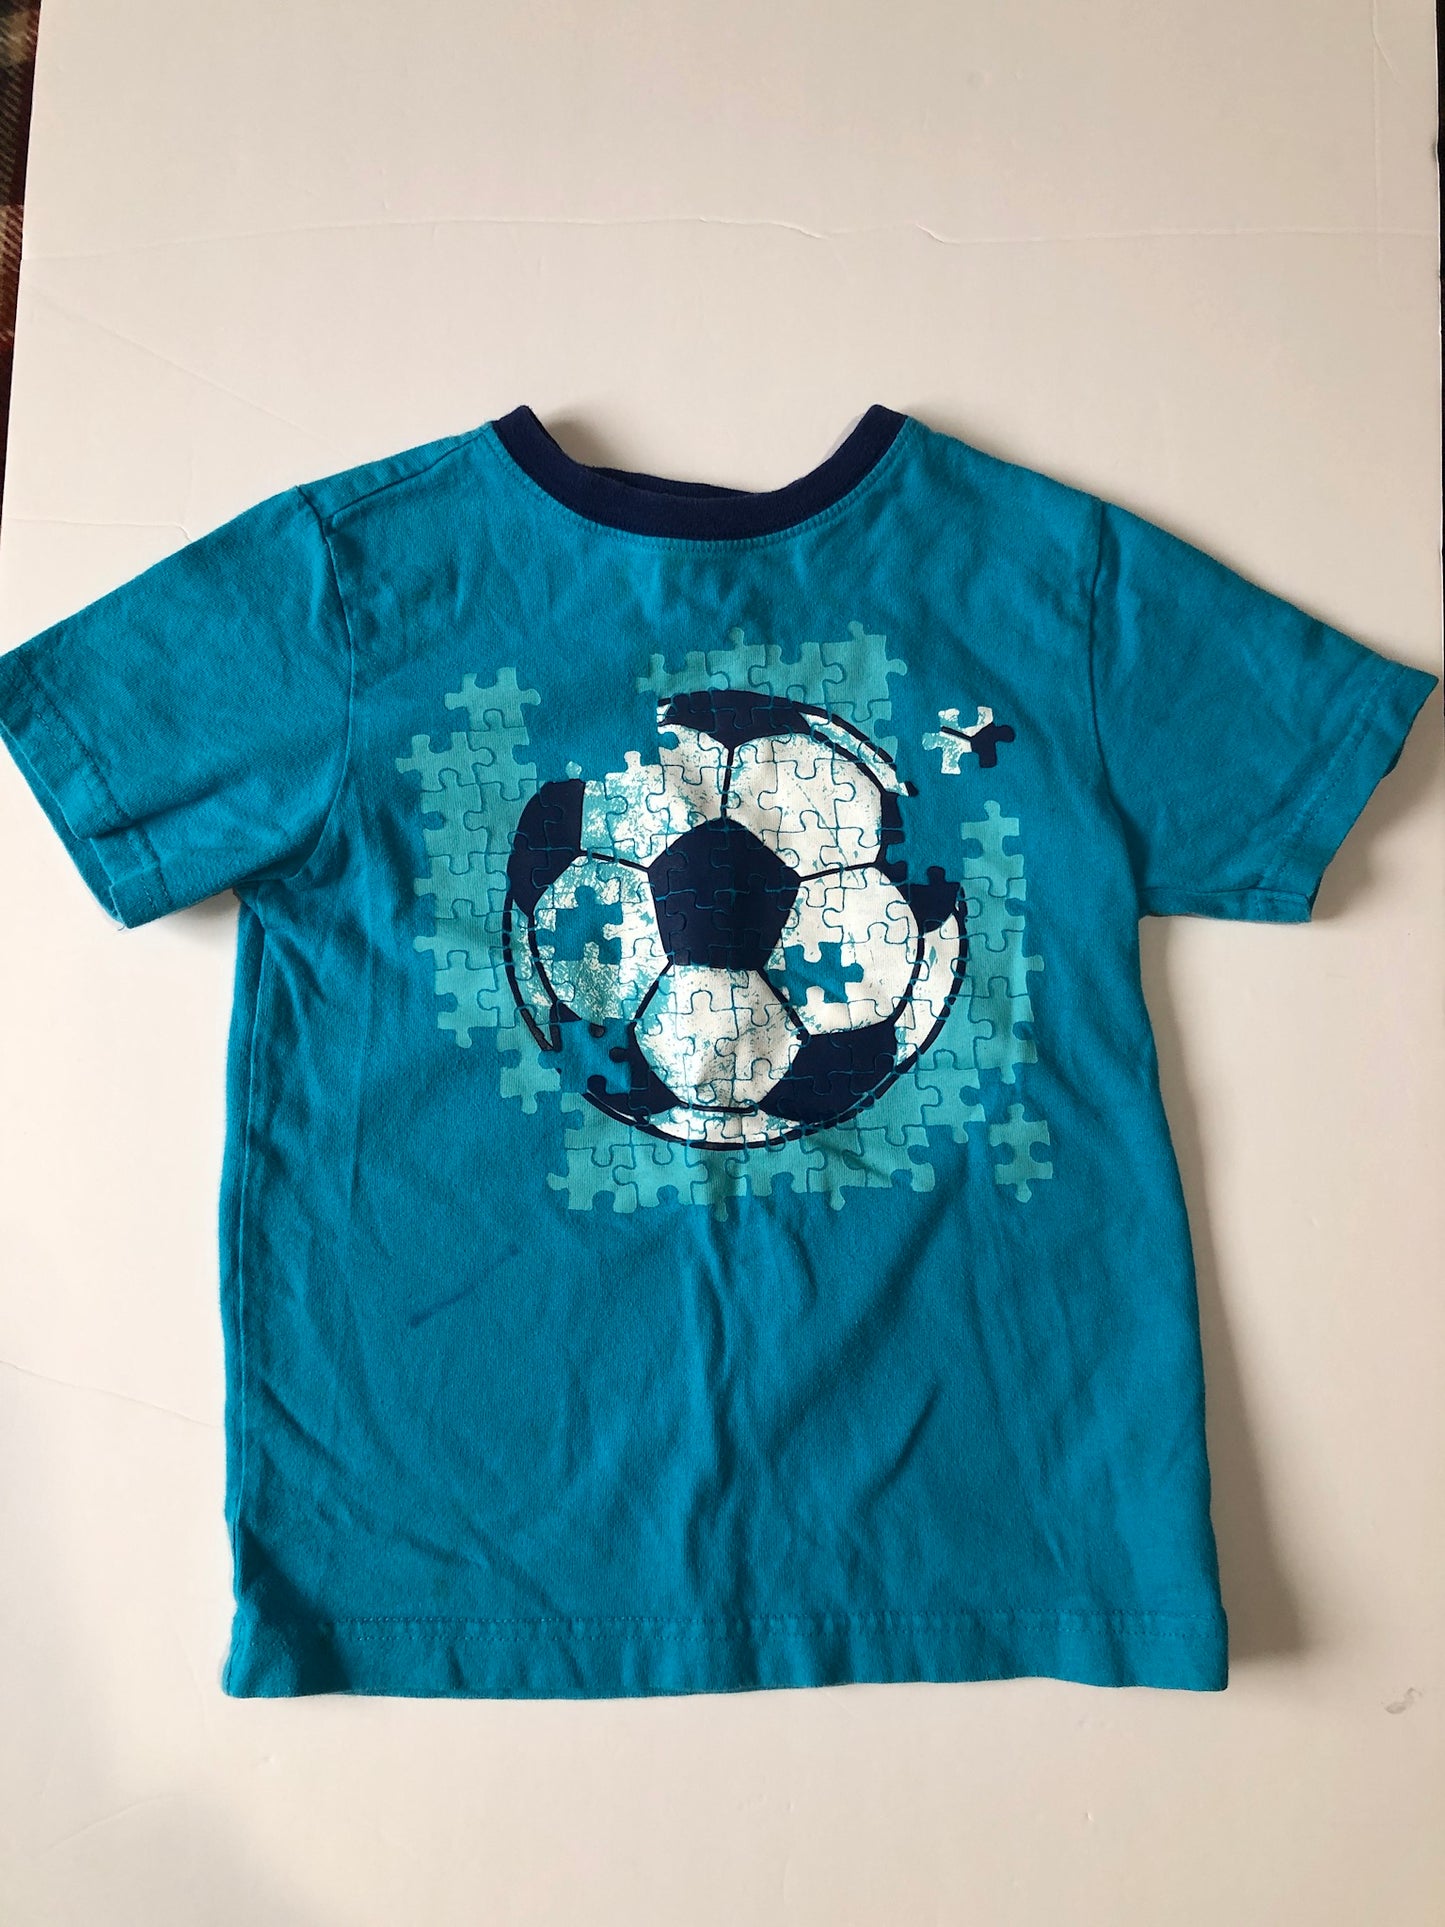 REDUCED PRICE 4 t boys Gymboree soccer t shirt teal blue